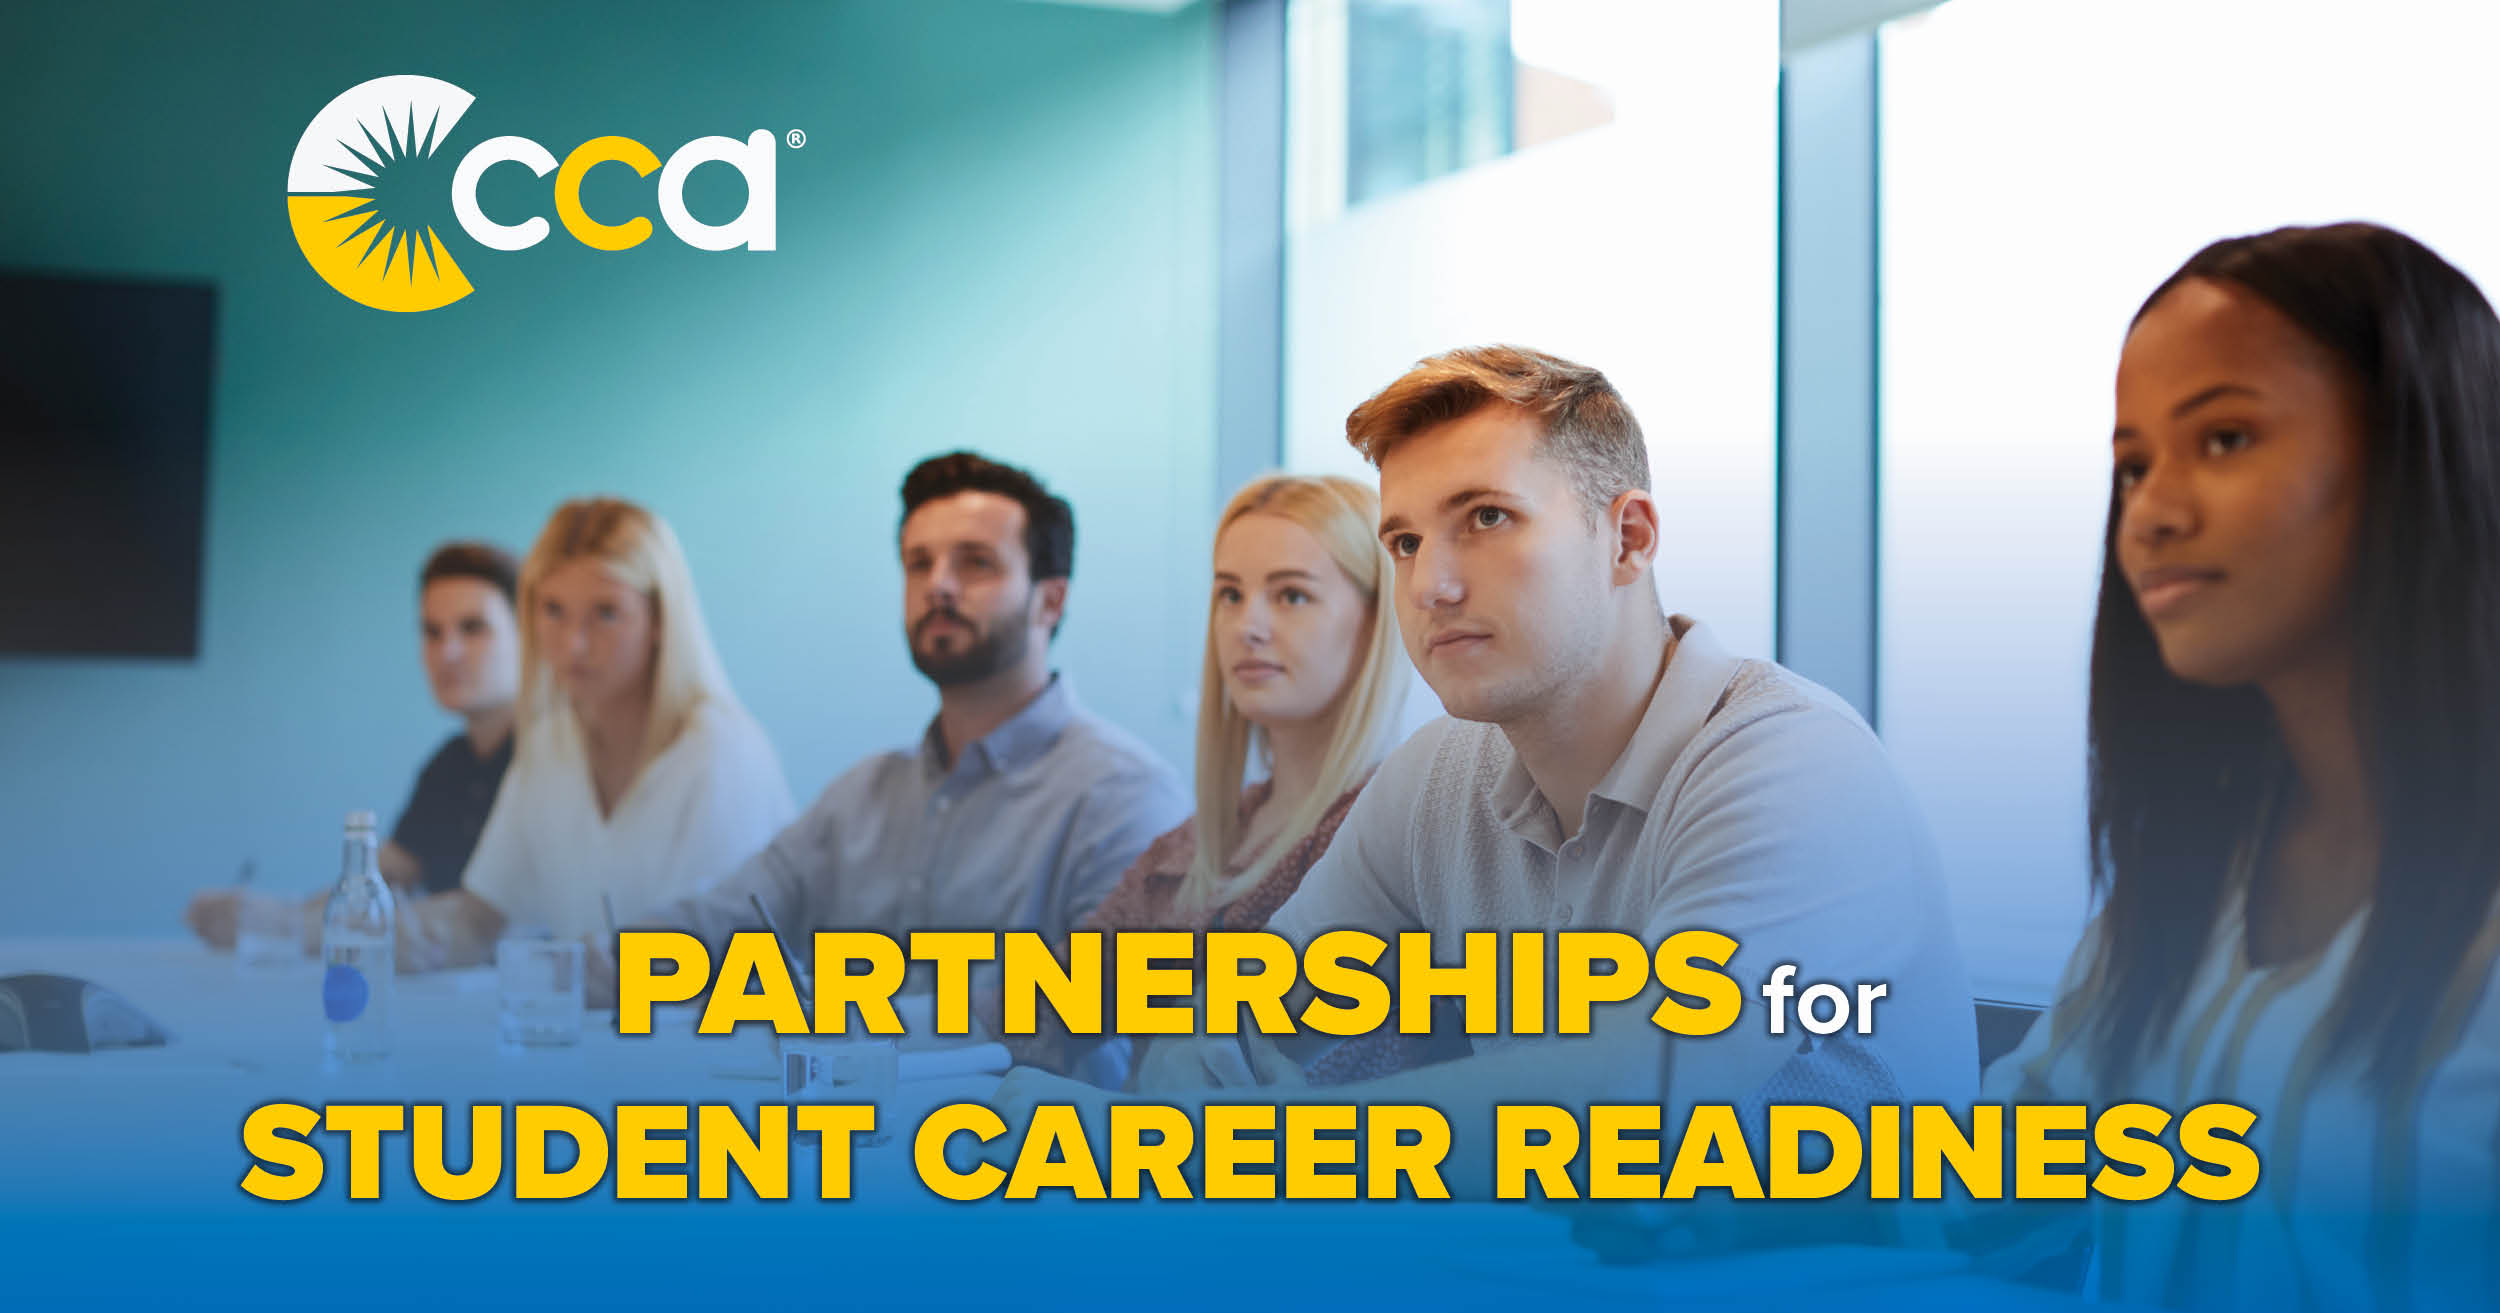 cca partnerships for student career readiness